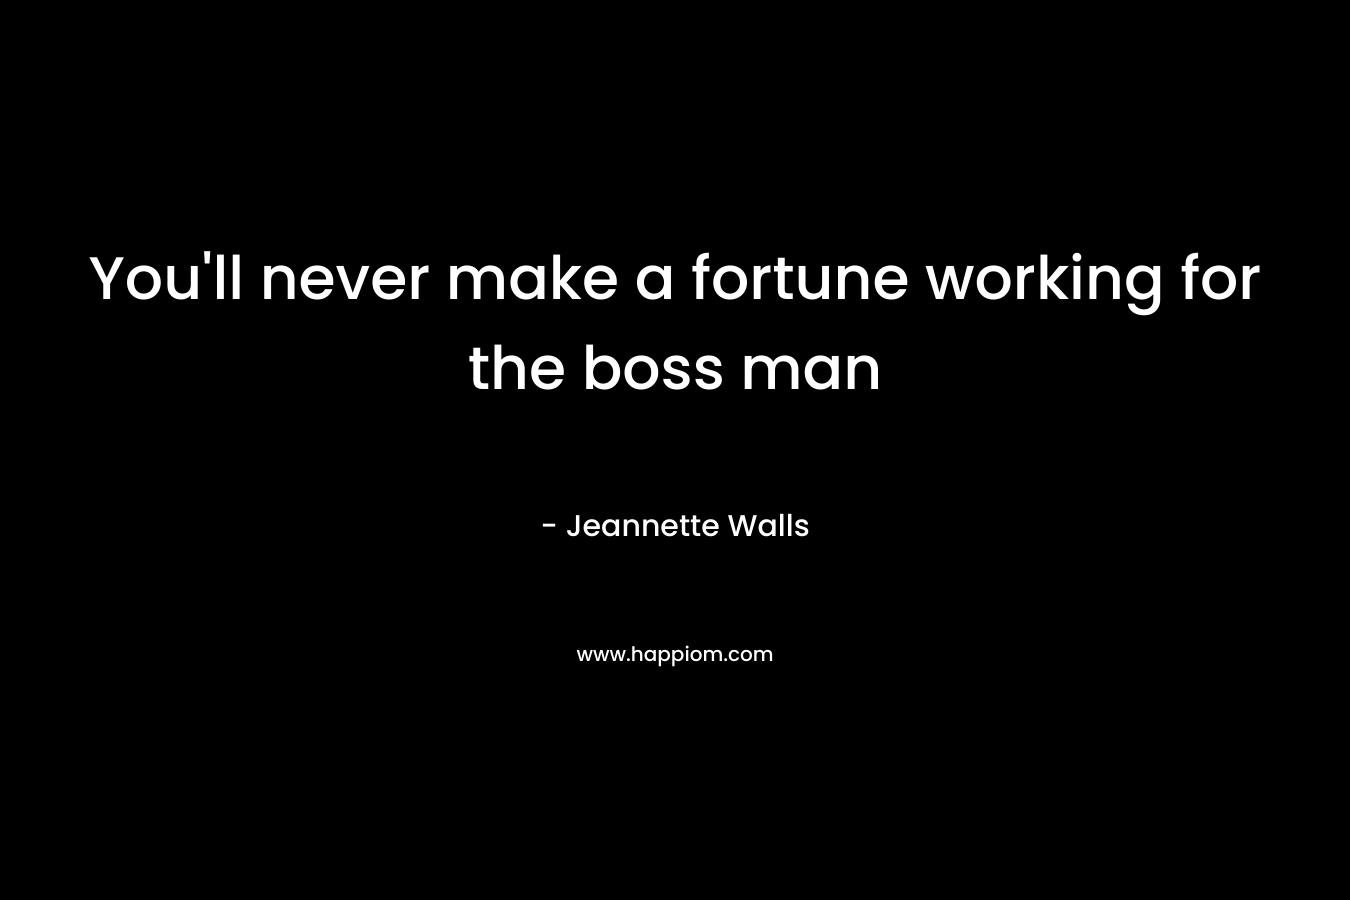 You’ll never make a fortune working for the boss man – Jeannette Walls